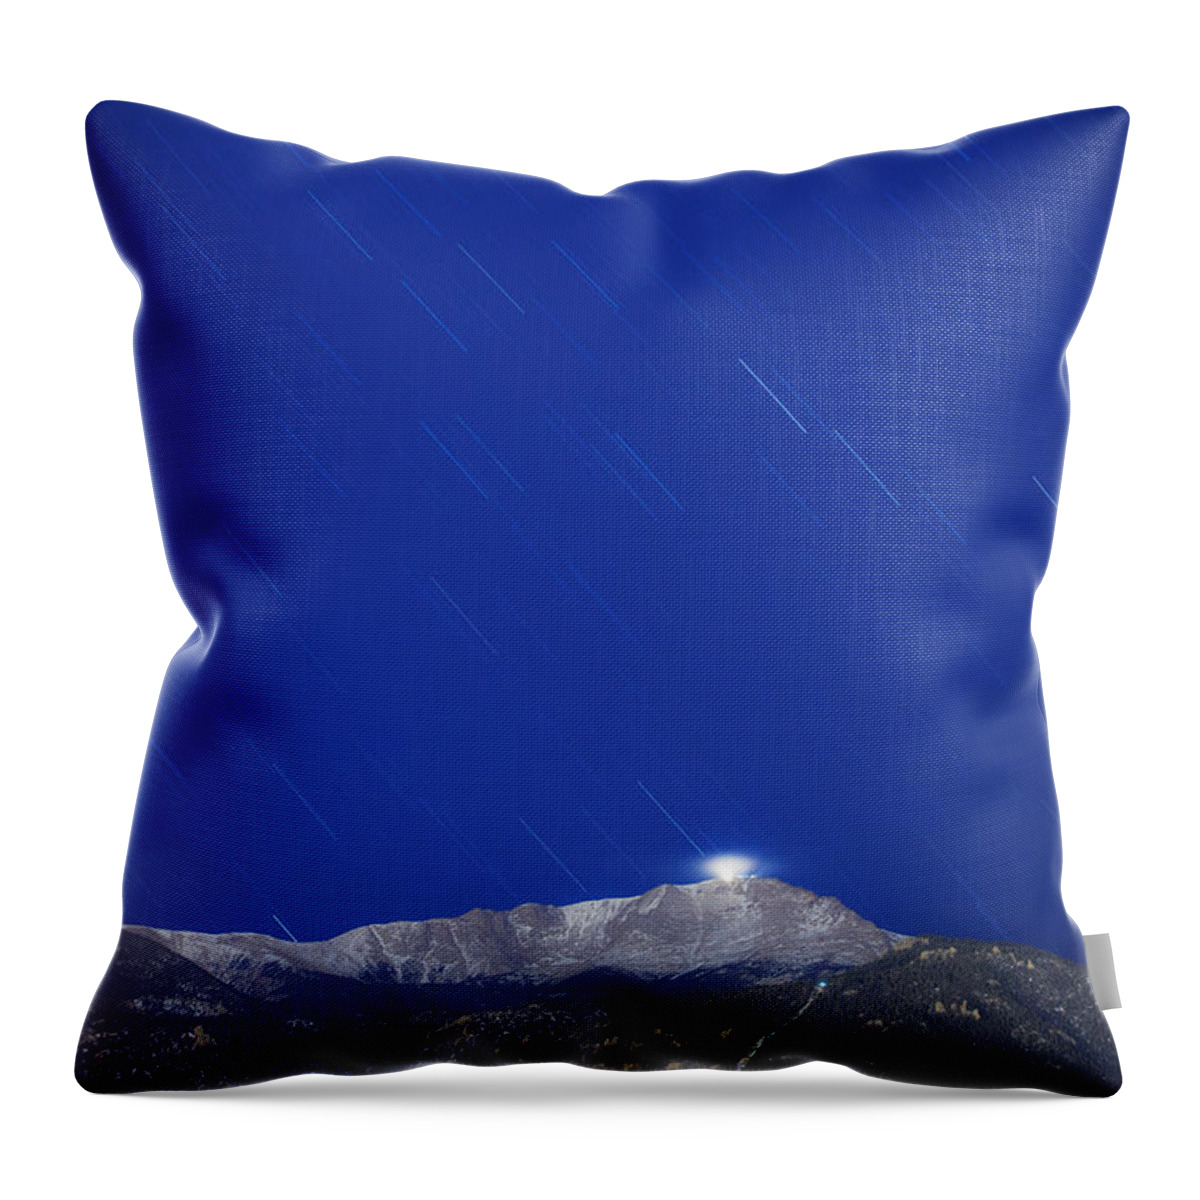 Long Exposure Throw Pillow featuring the photograph Pikes Peak Under The Stars by Darren White